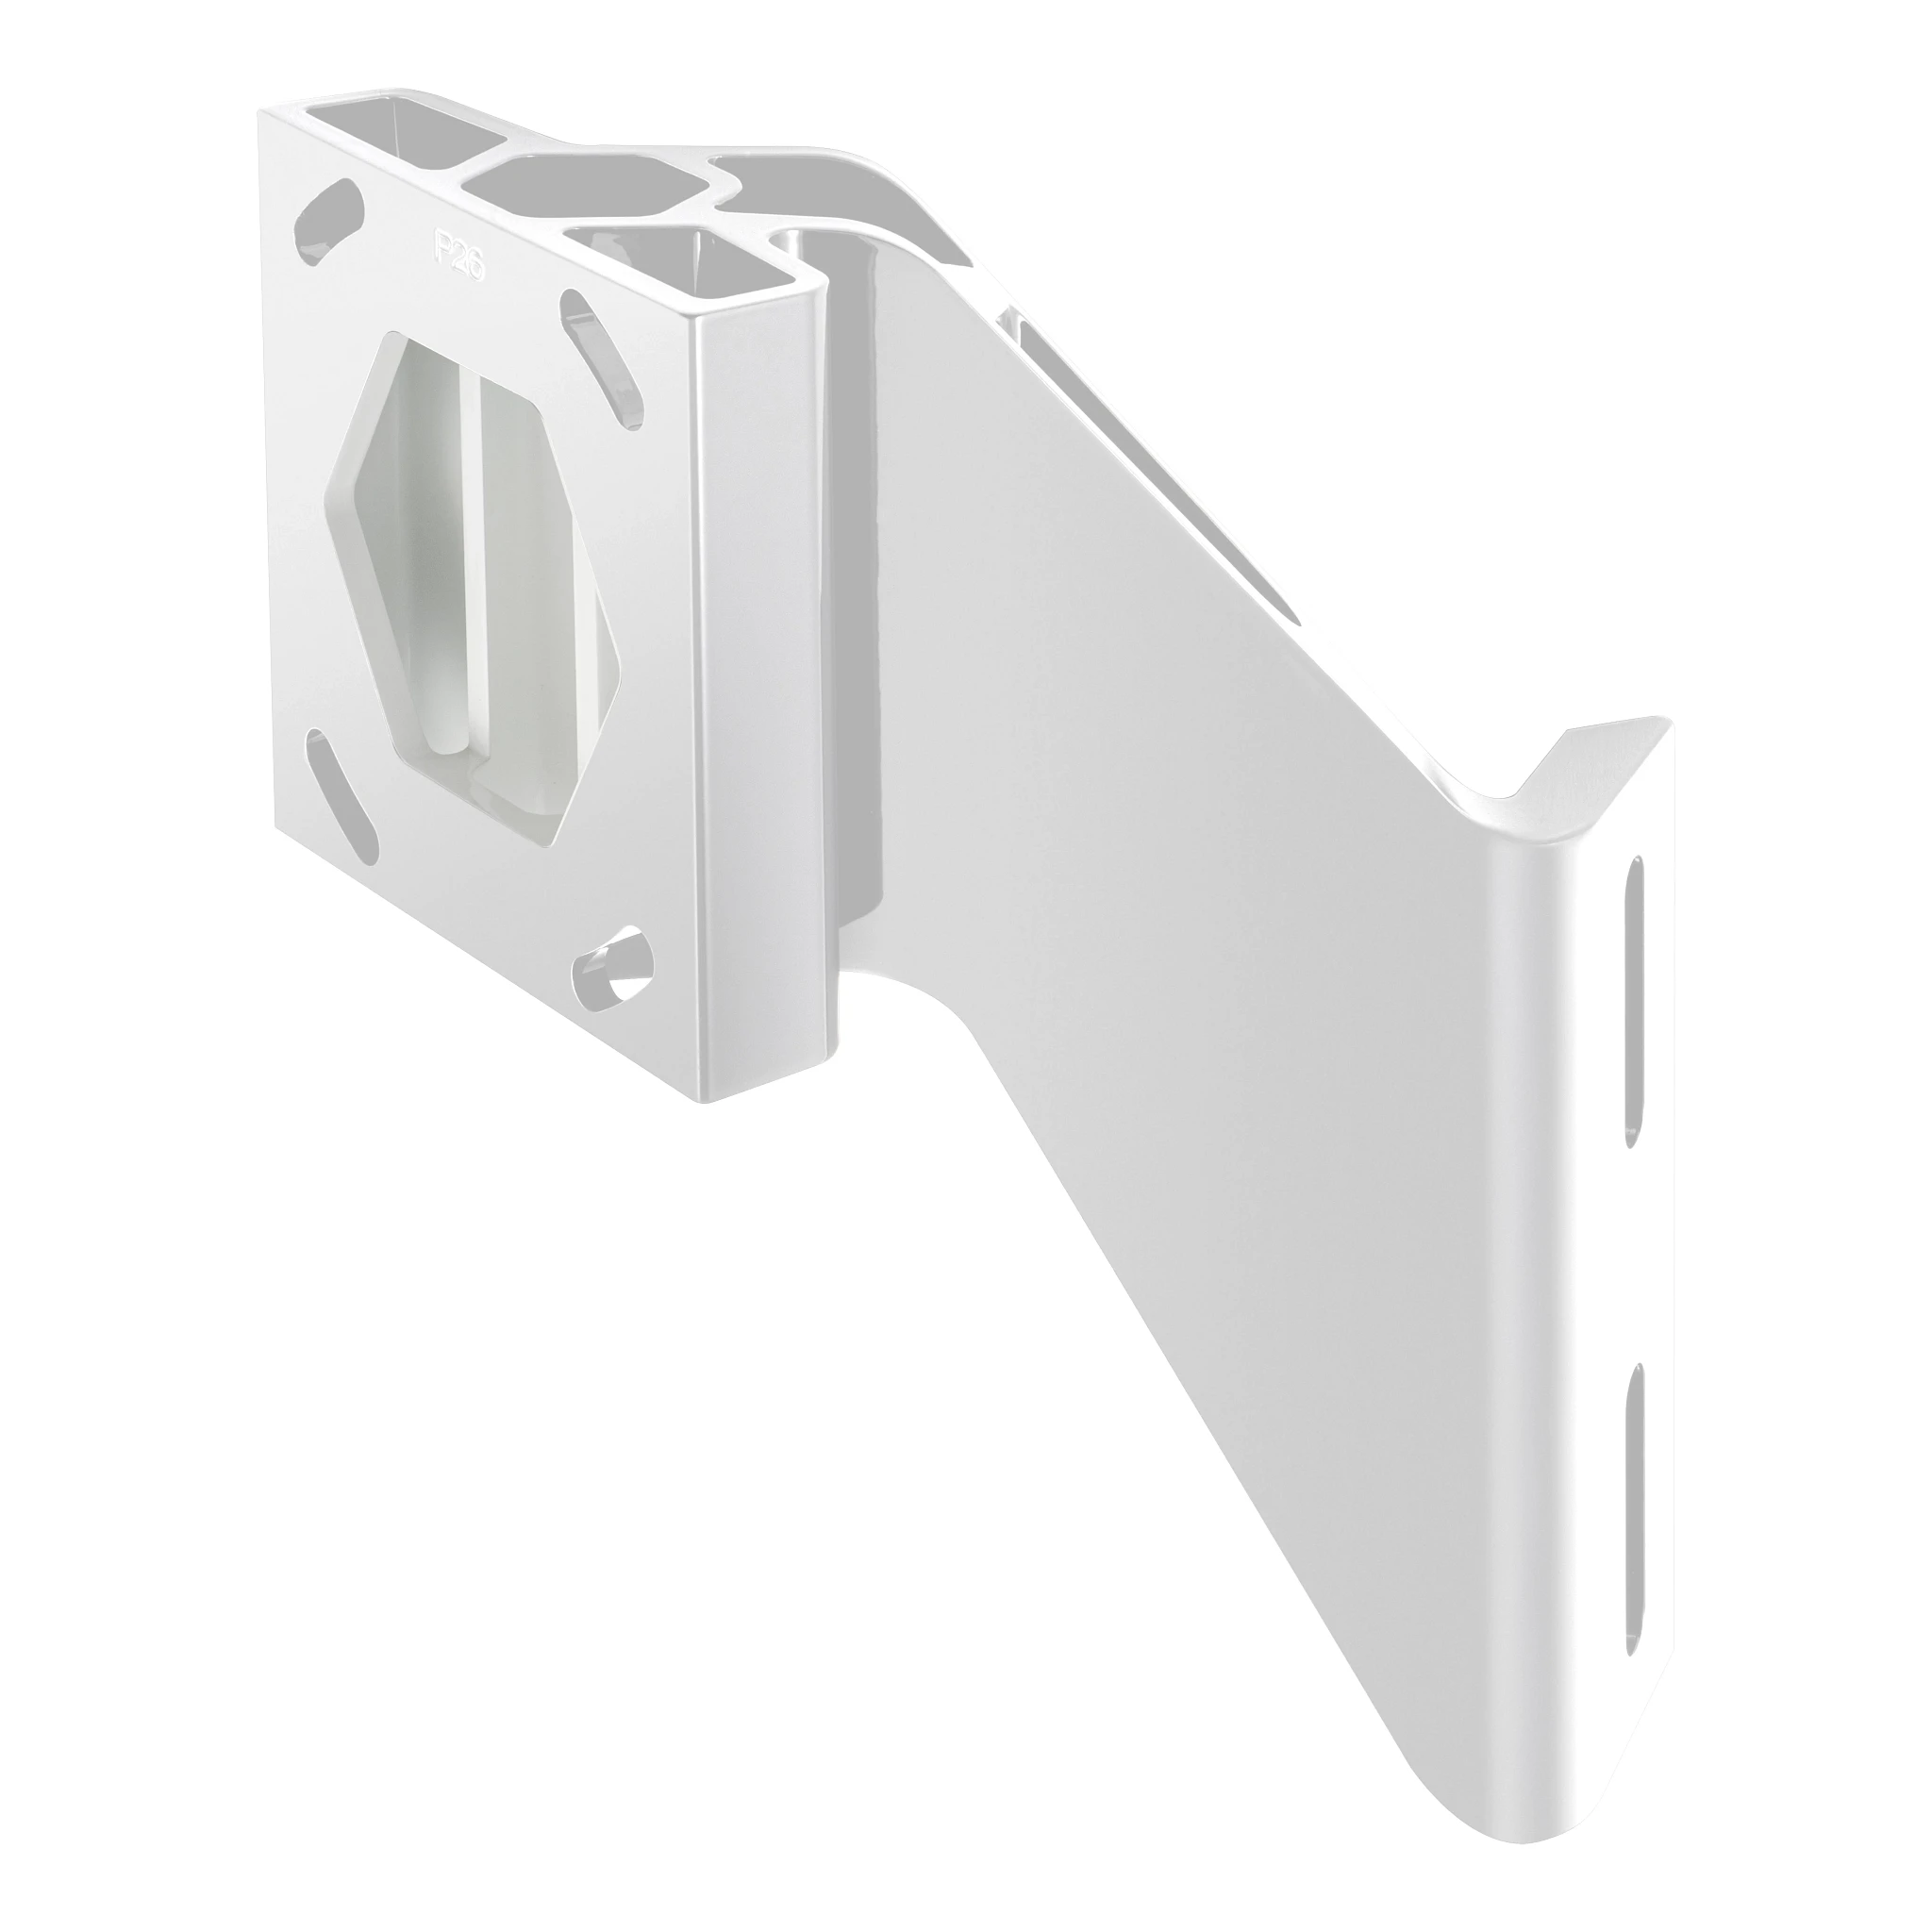 Angled view of white, 6" port jack plate for Raptor shallow water anchor